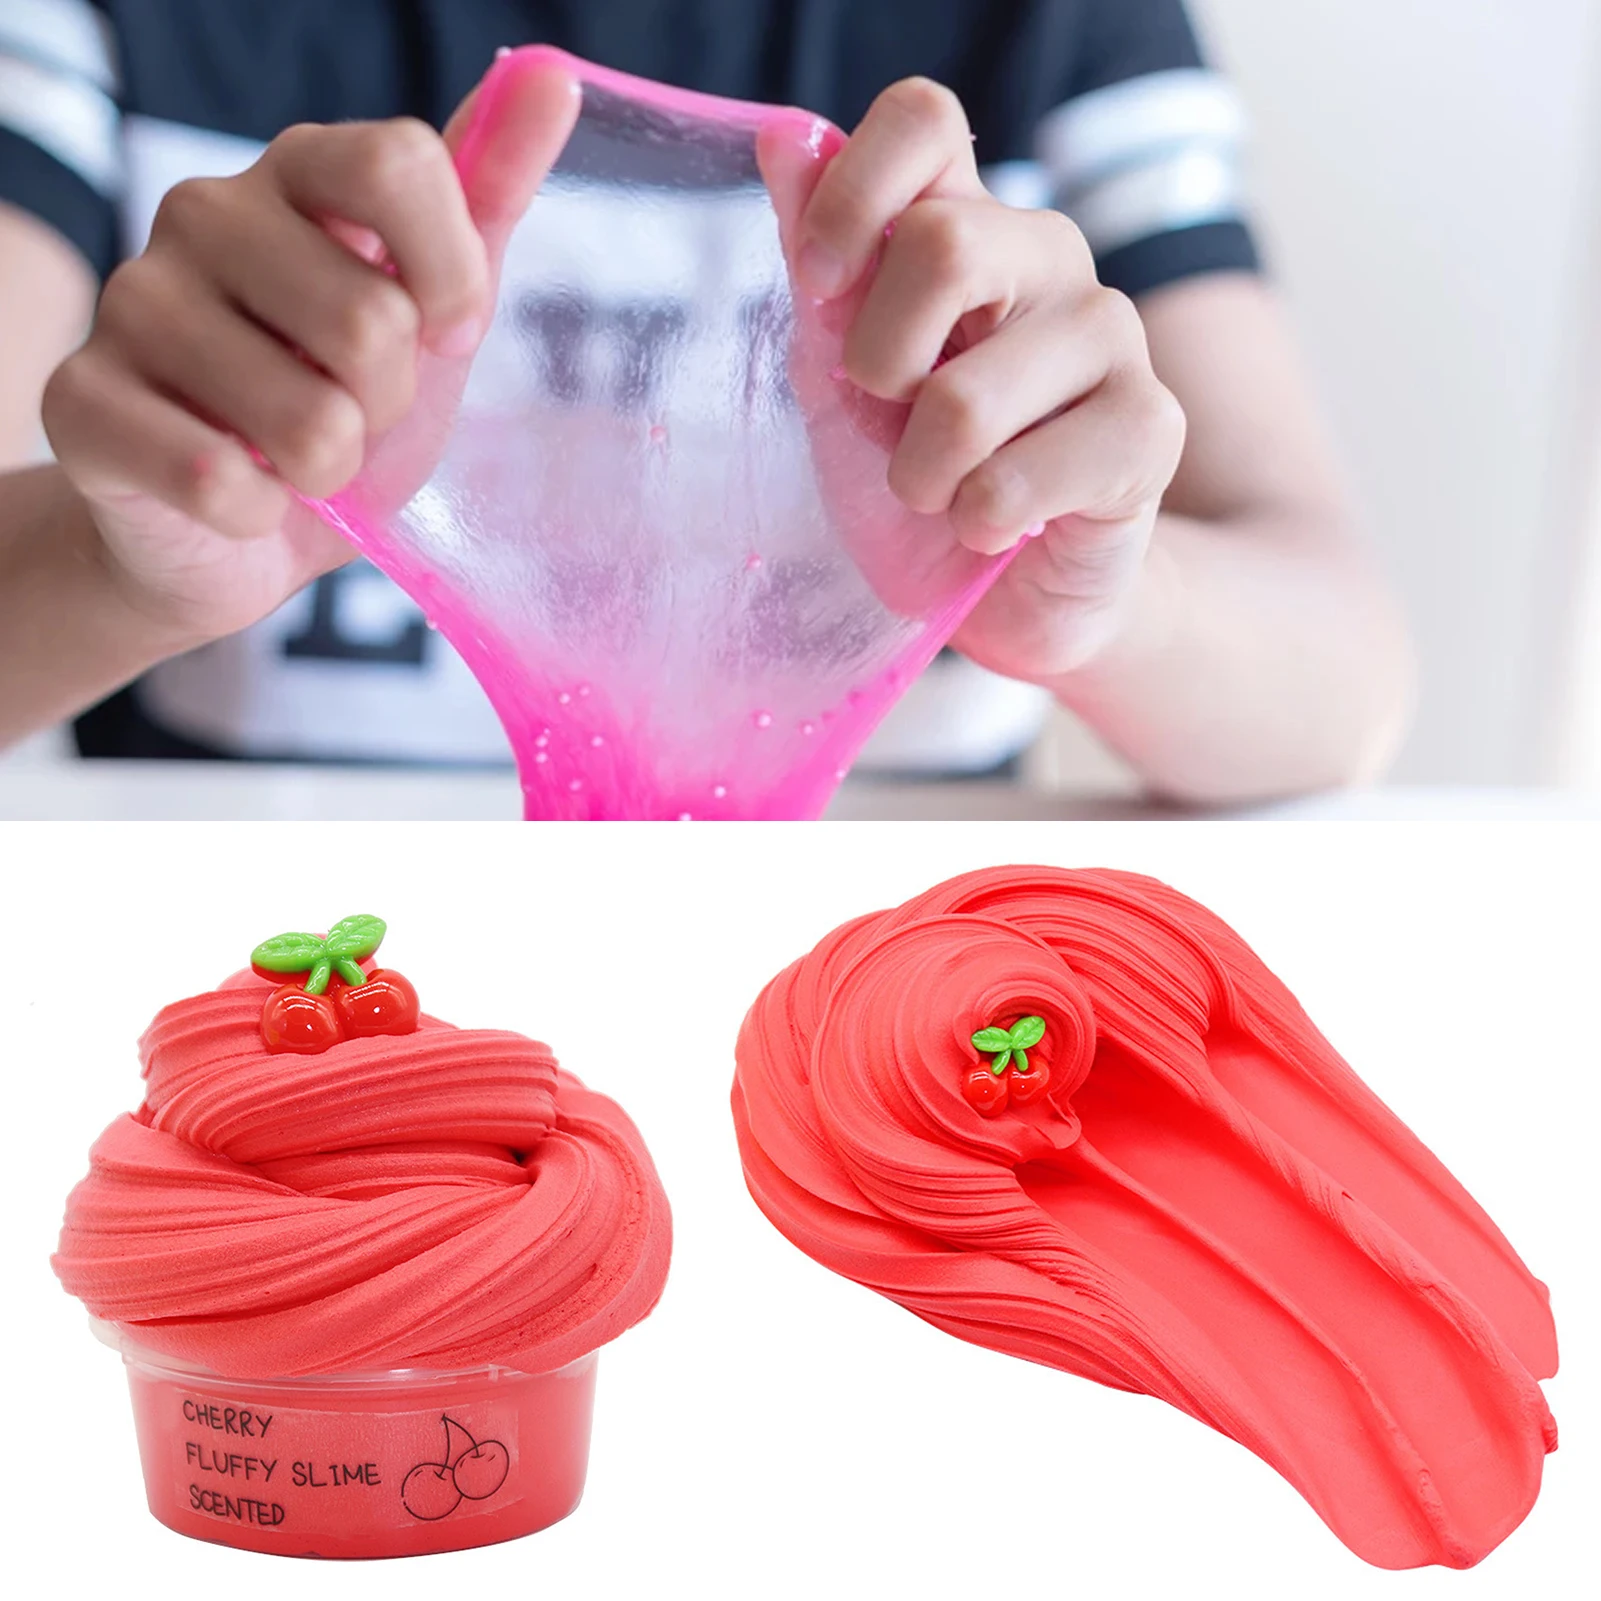 60ml Biscuit Slime Mud Clay Craft Fruit Slime Fluffy Glue Portable